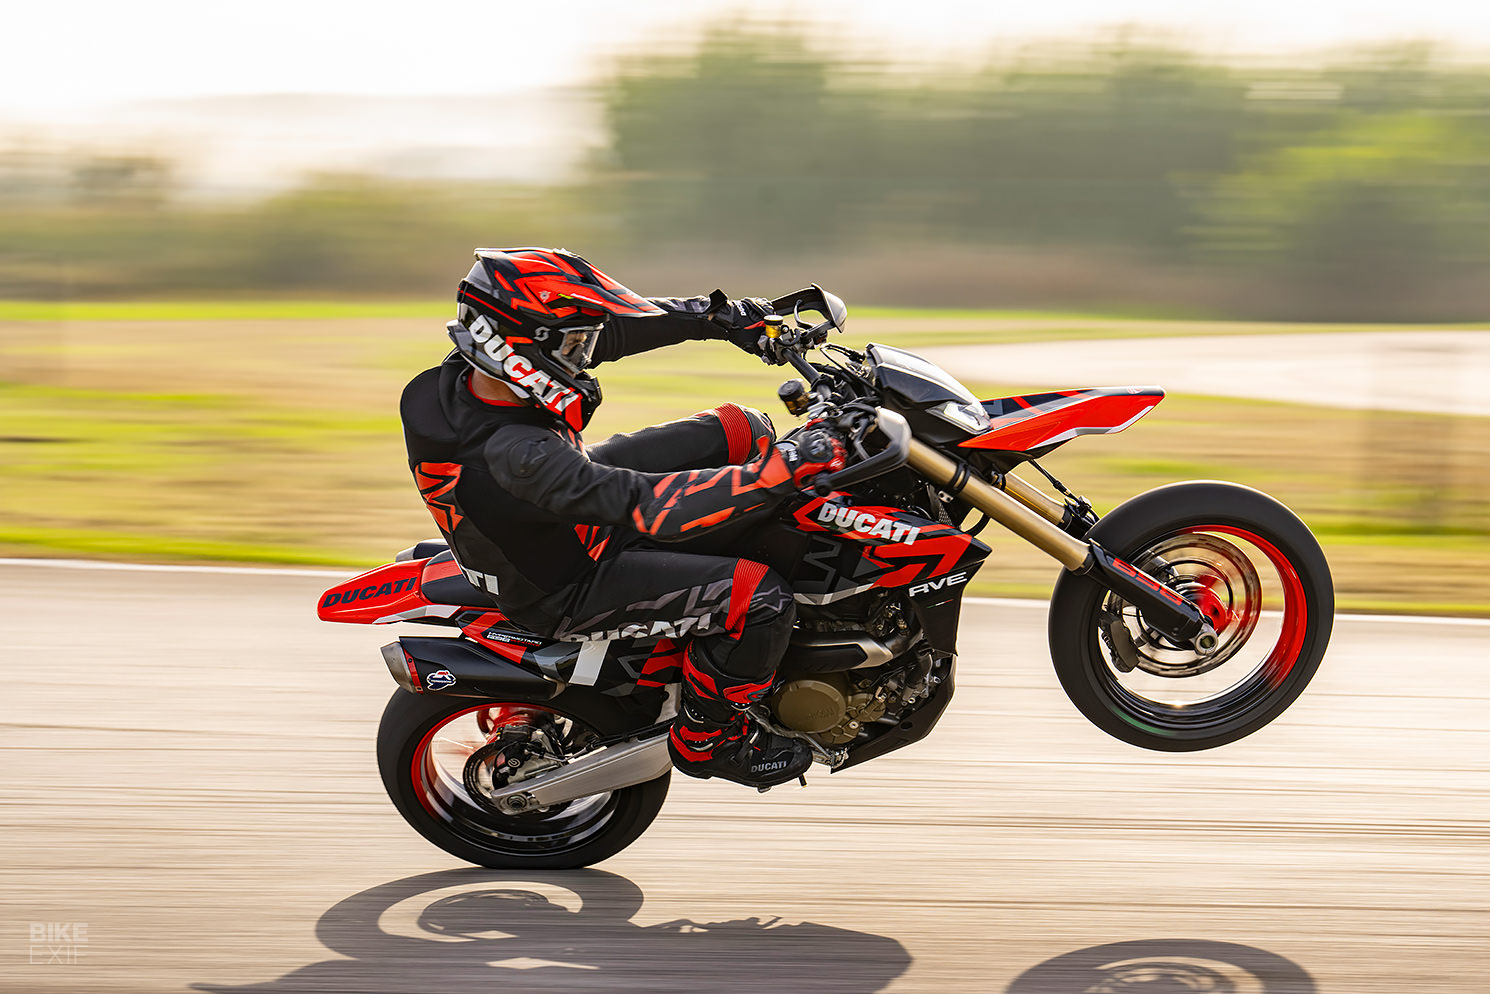 Ducati introduces the Hypermotard 698 Mono, a track-focused beast powered by the most powerful single-cylinder engine ever